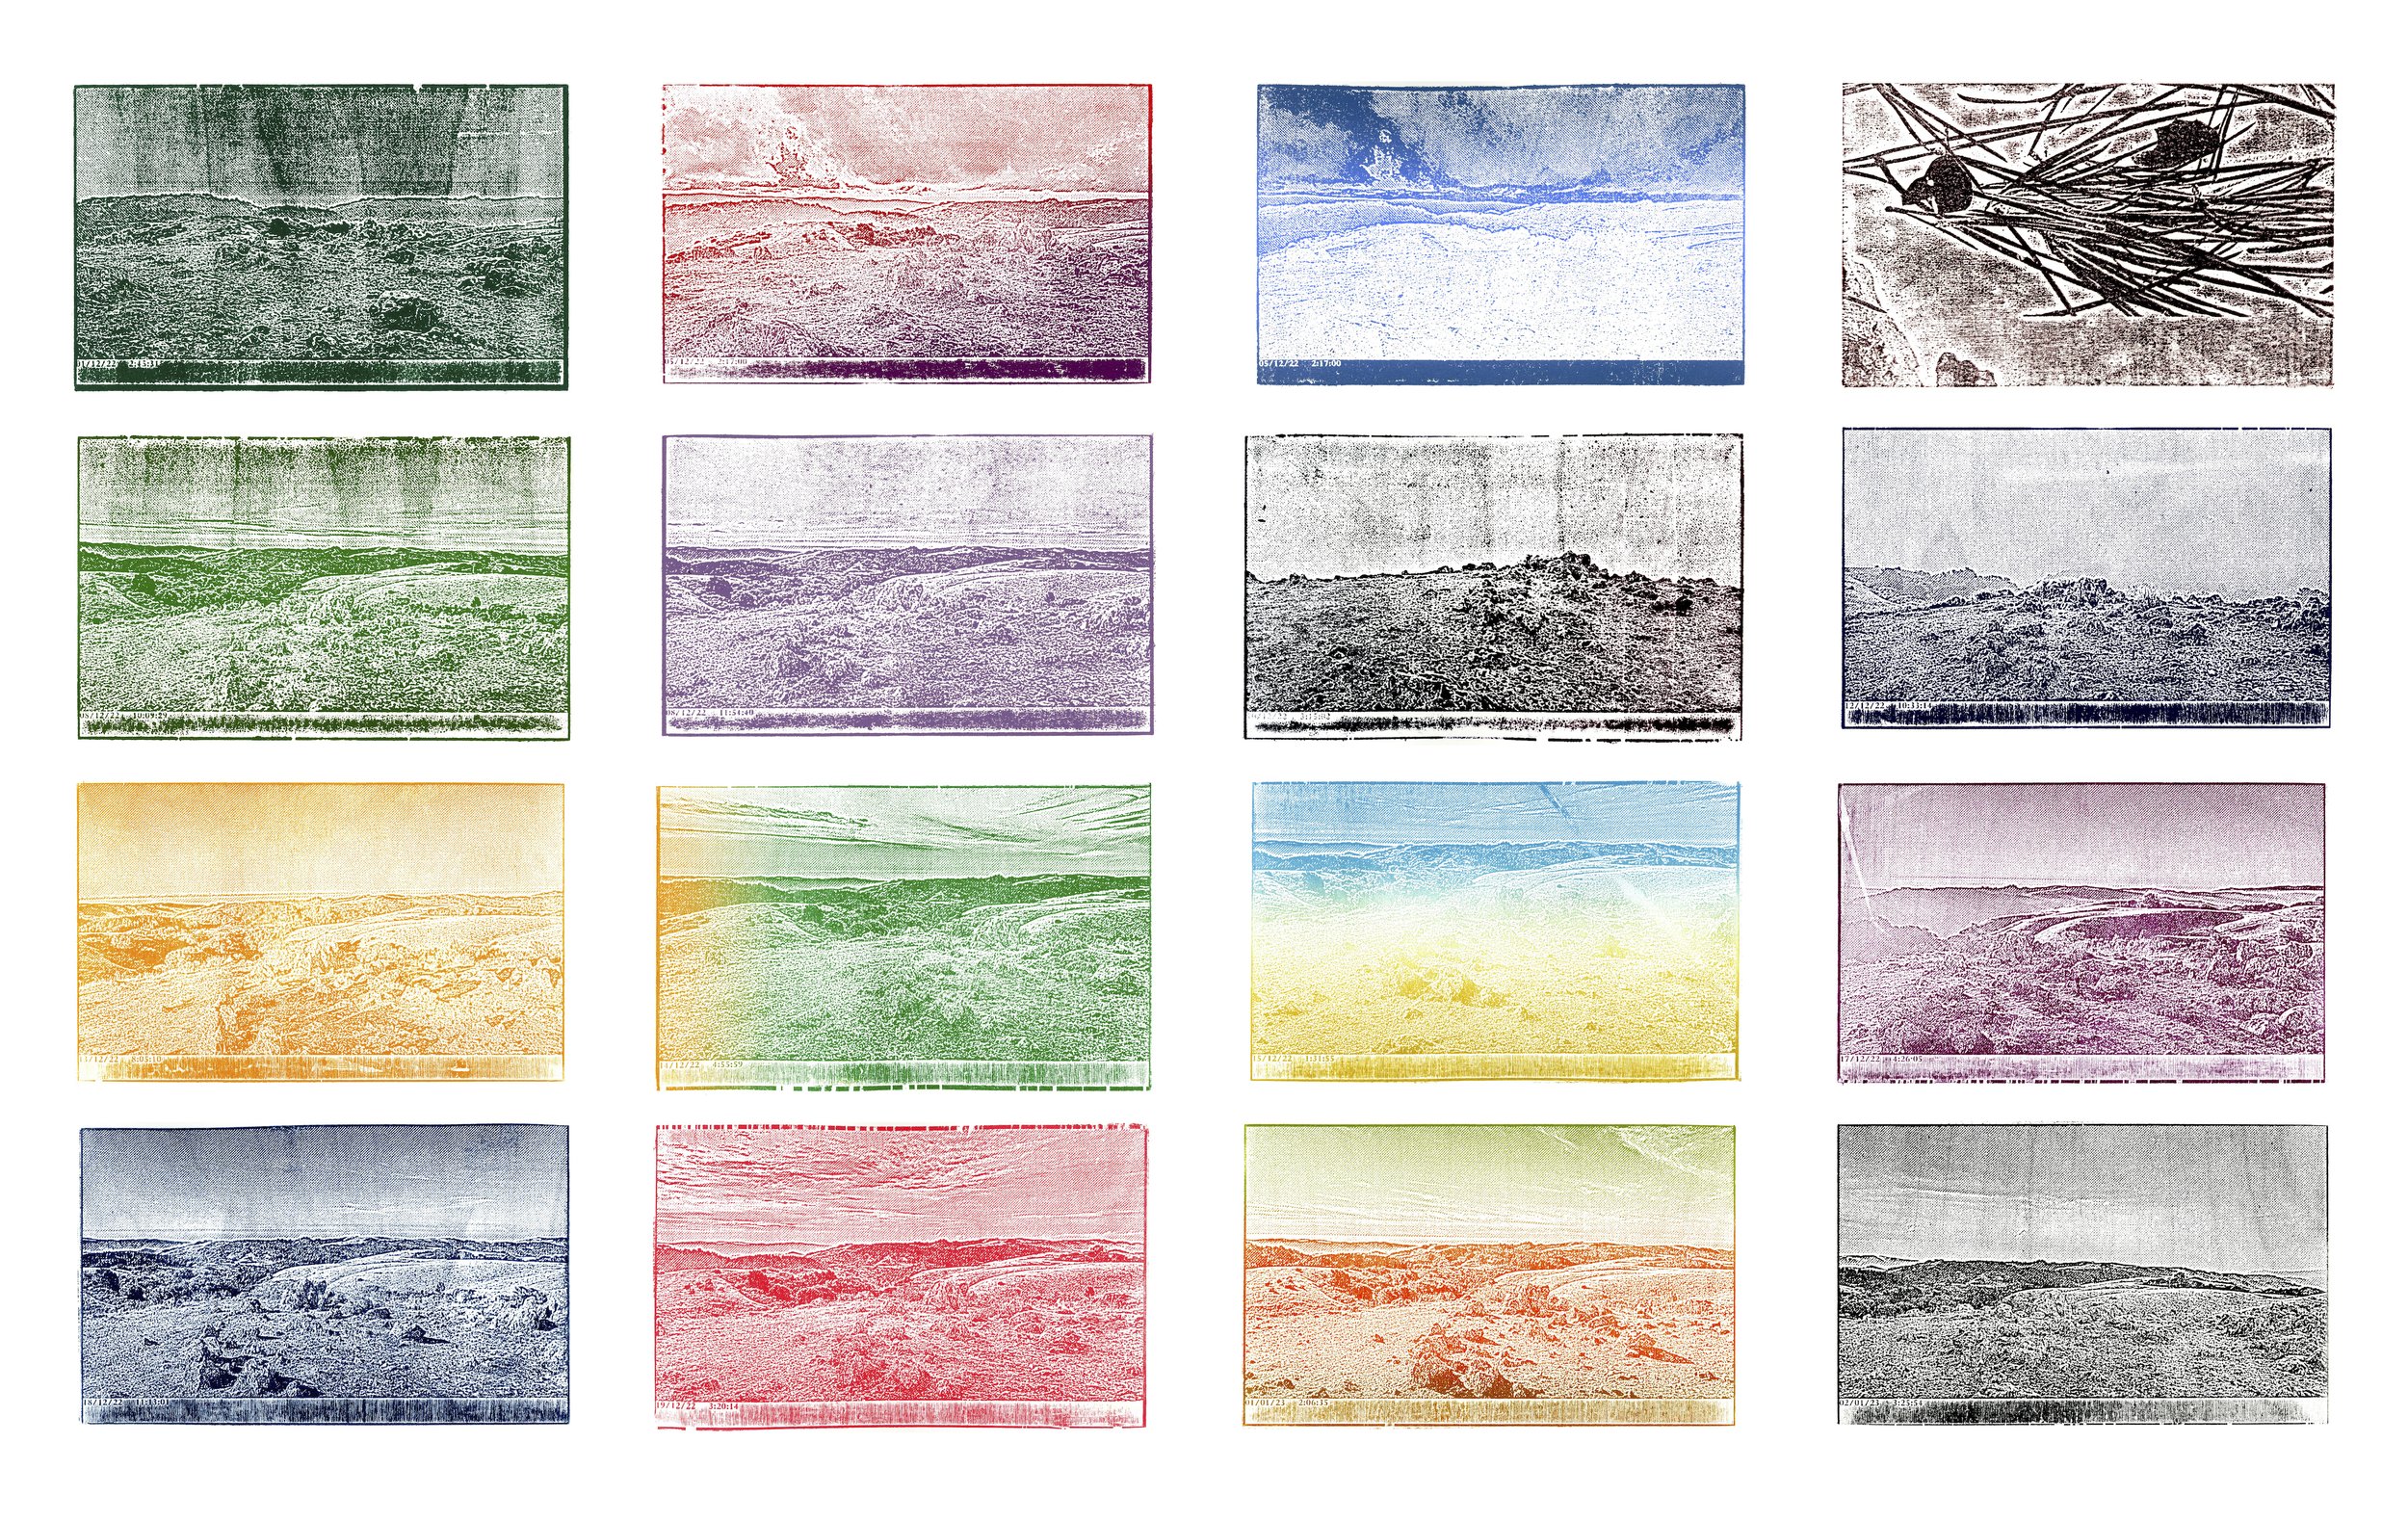 Prints from 16 Colorstudies of Black Mountain